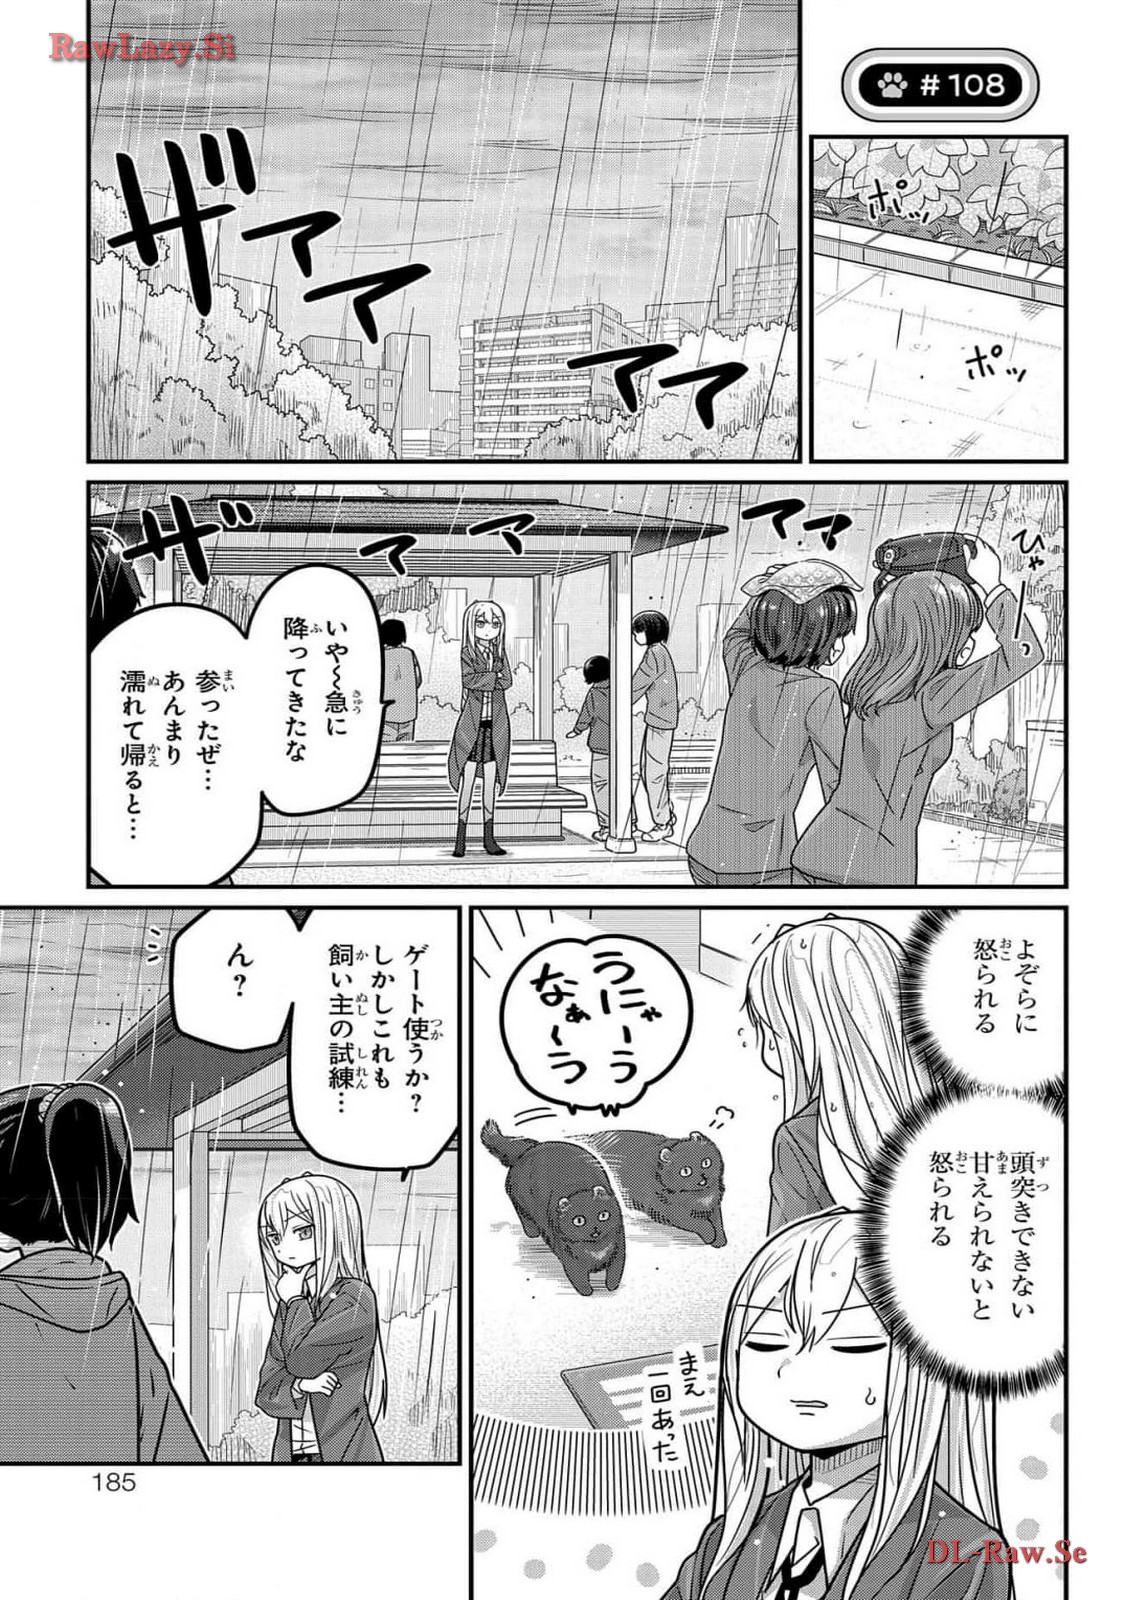 Kawaisugi Crisis - Chapter Kawaisugi_Crisis_Chapter_108 - Page 1